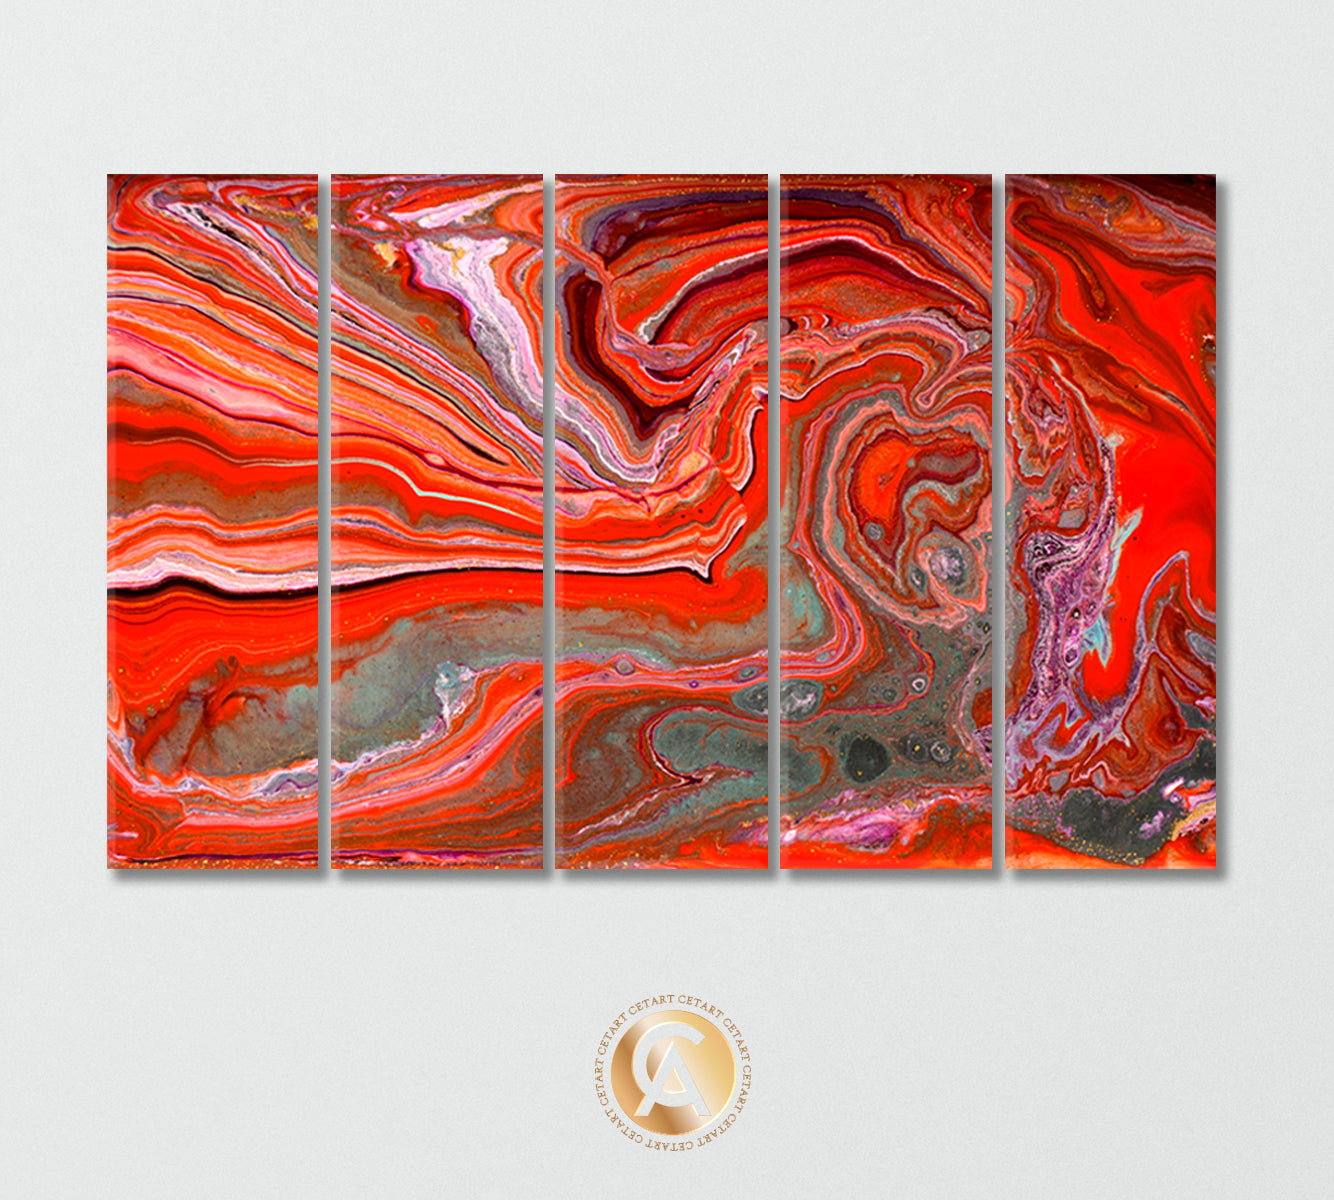 Combination of Red and Gray Agate Canvas Print-Canvas Print-CetArt-5 Panels-36x24 inches-CetArt